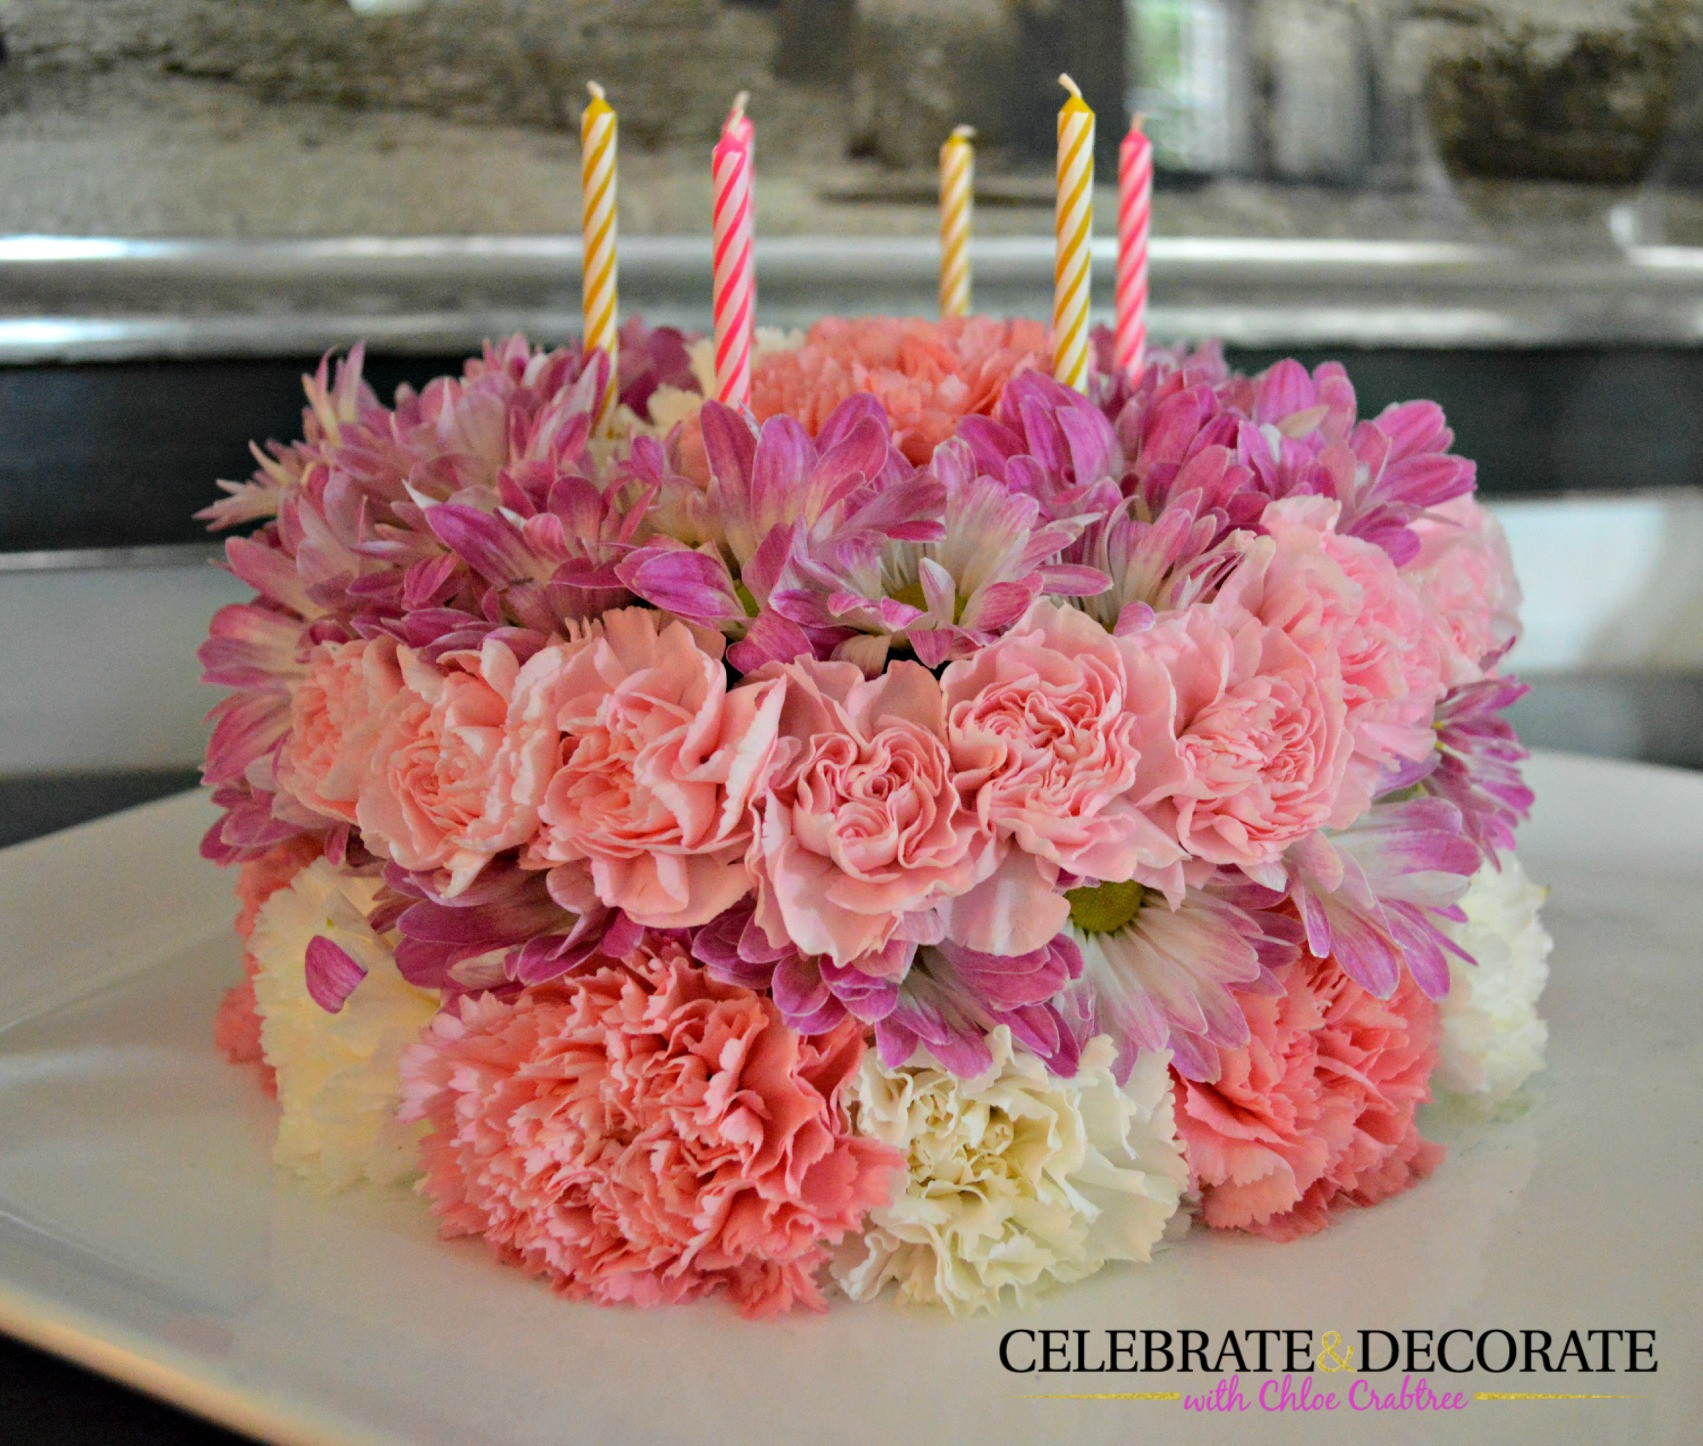 Flowers Birthday Cake
 How to Make a Floral Birthday Cake Celebrate & Decorate